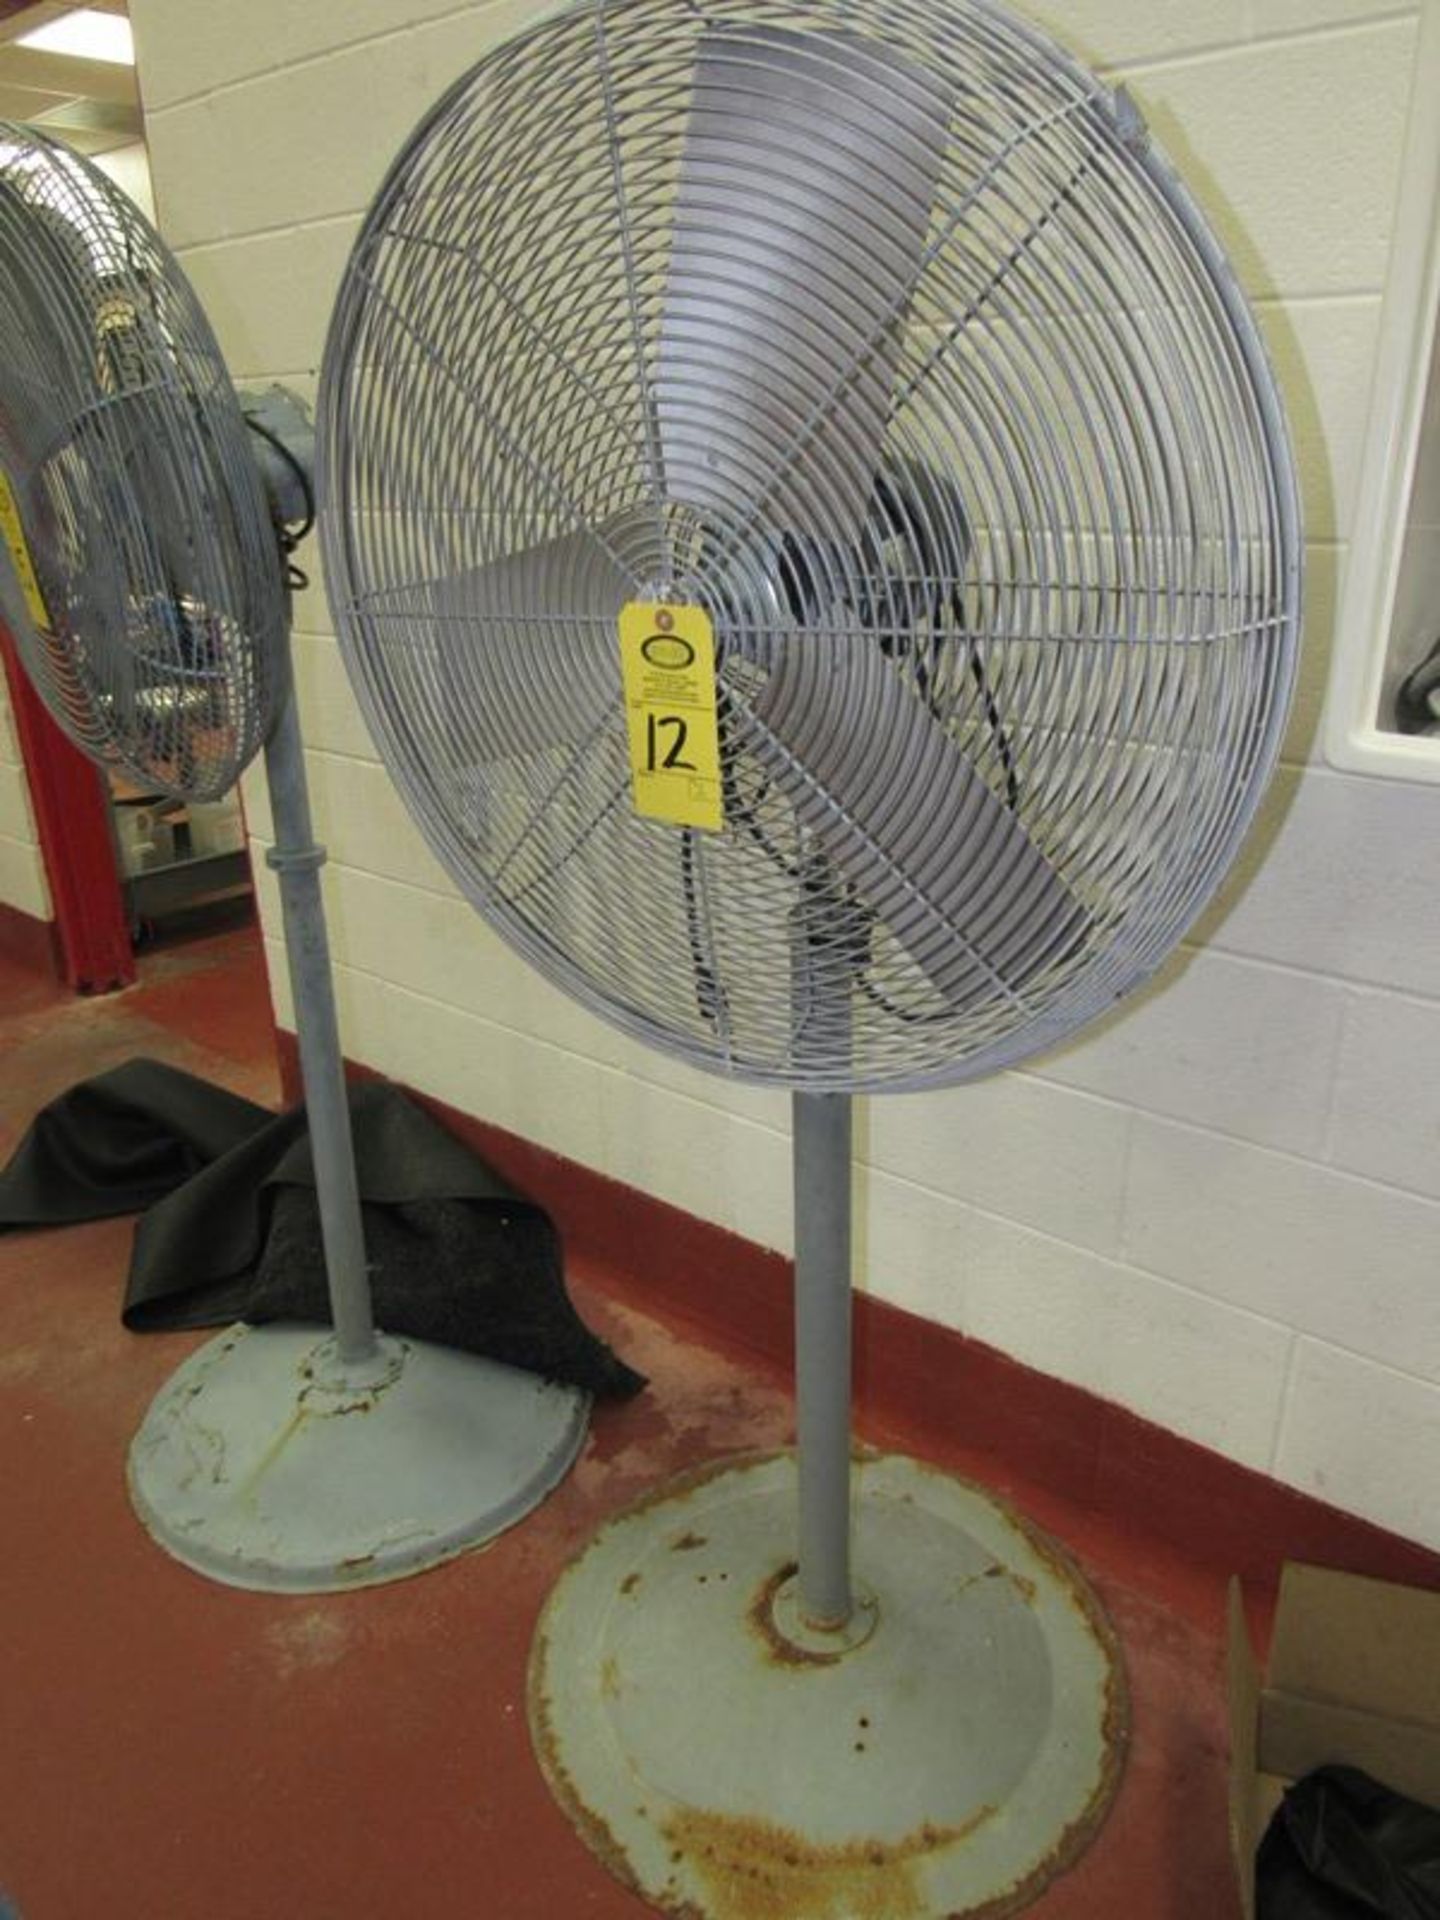 Pedestal Fan, 27" diameter, adjustable height (Required Loading Fee $15.00 Norm Pavlish 402-540-8843